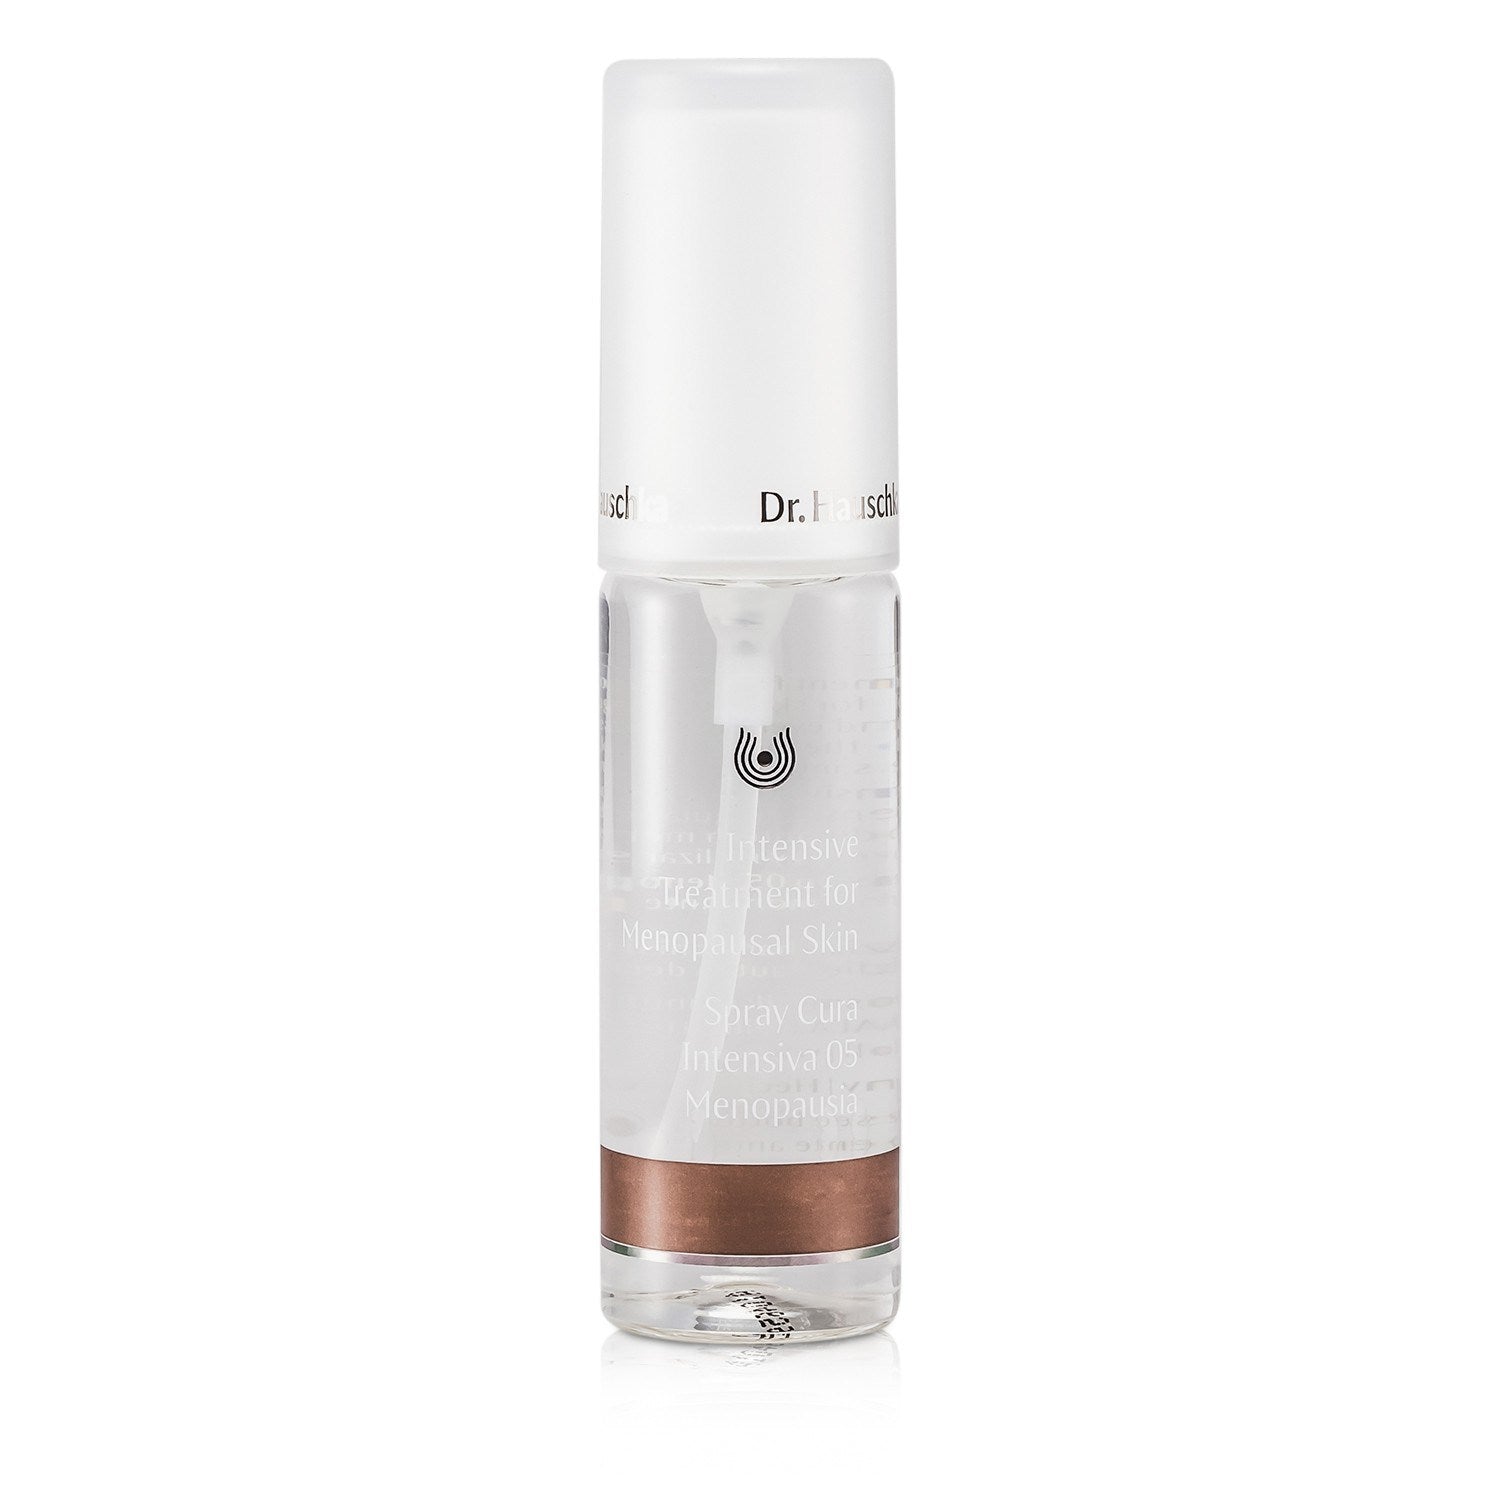 DR. HAUSCHKA - Intensive Treatment for Menopausal Skin - 40ml/1.3oz 3P's Inclusive Beauty